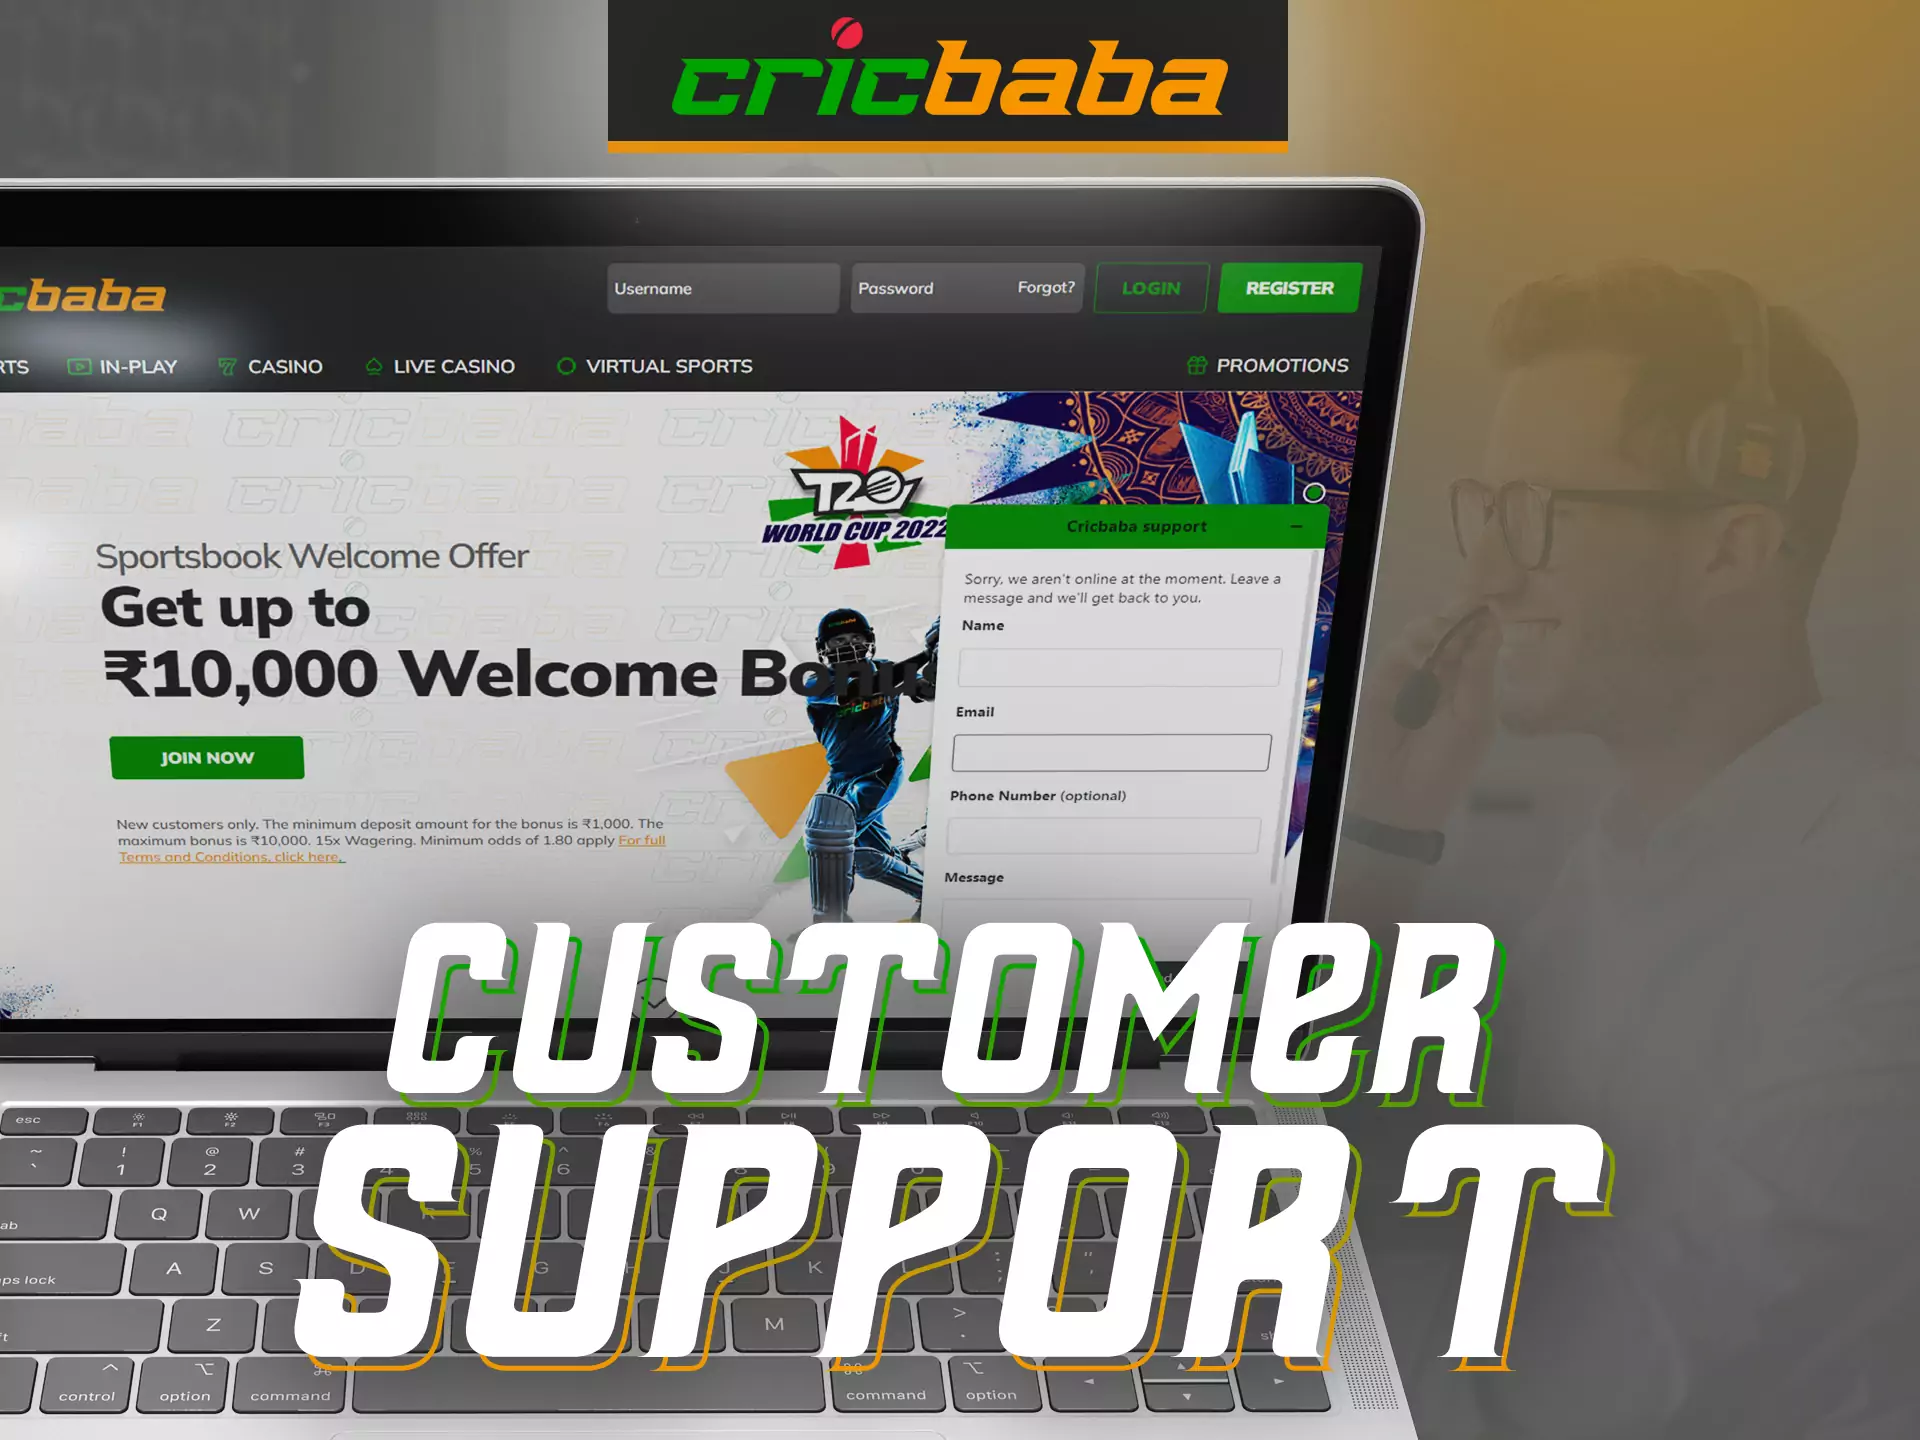 Cricbaba support is ready to assist users at any time.